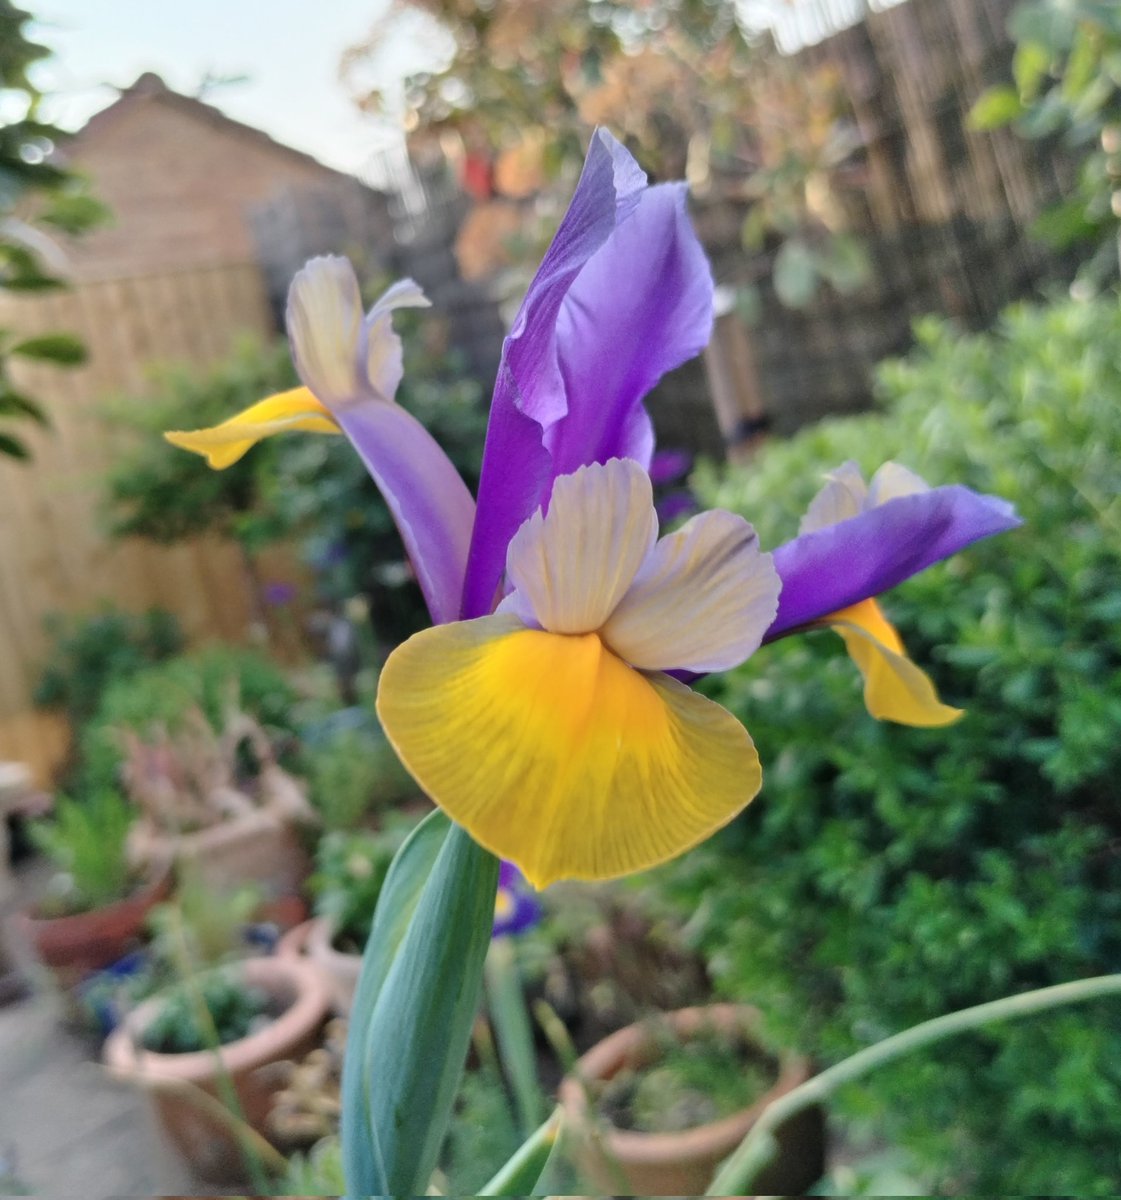 A curious Iris checking me out the other day #GardensHour